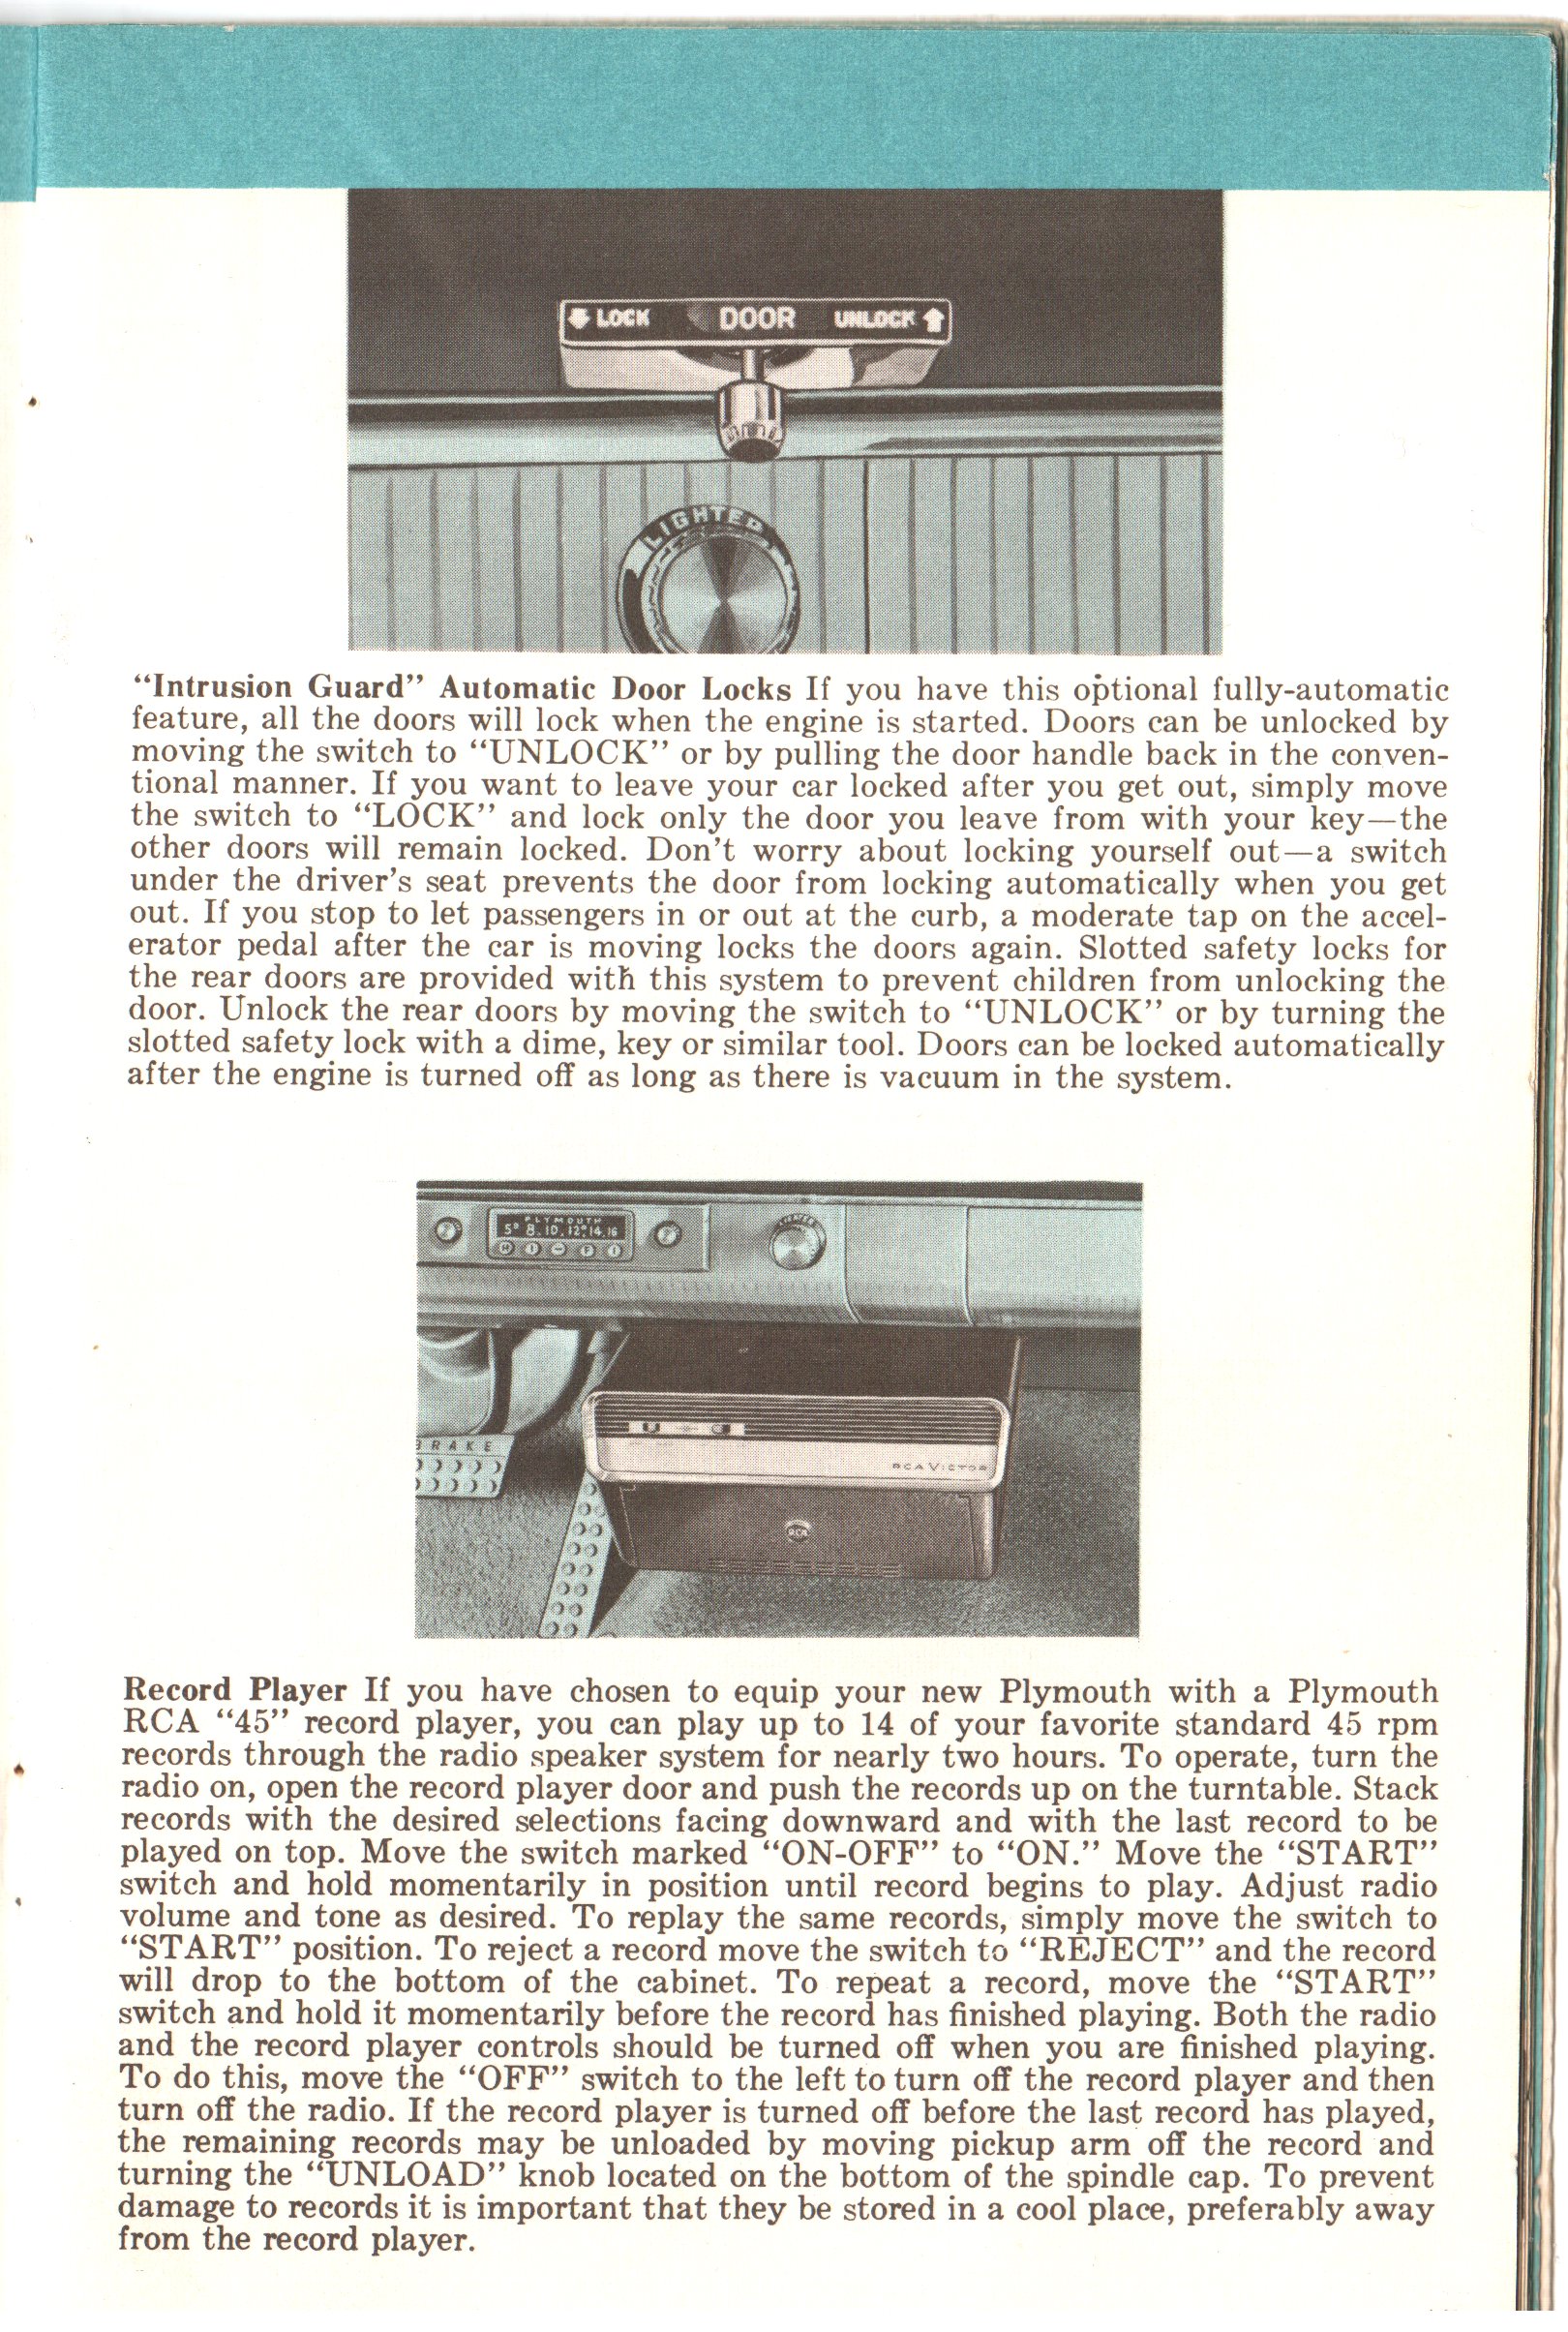 1960_Plymouth_Owners_Manual-15